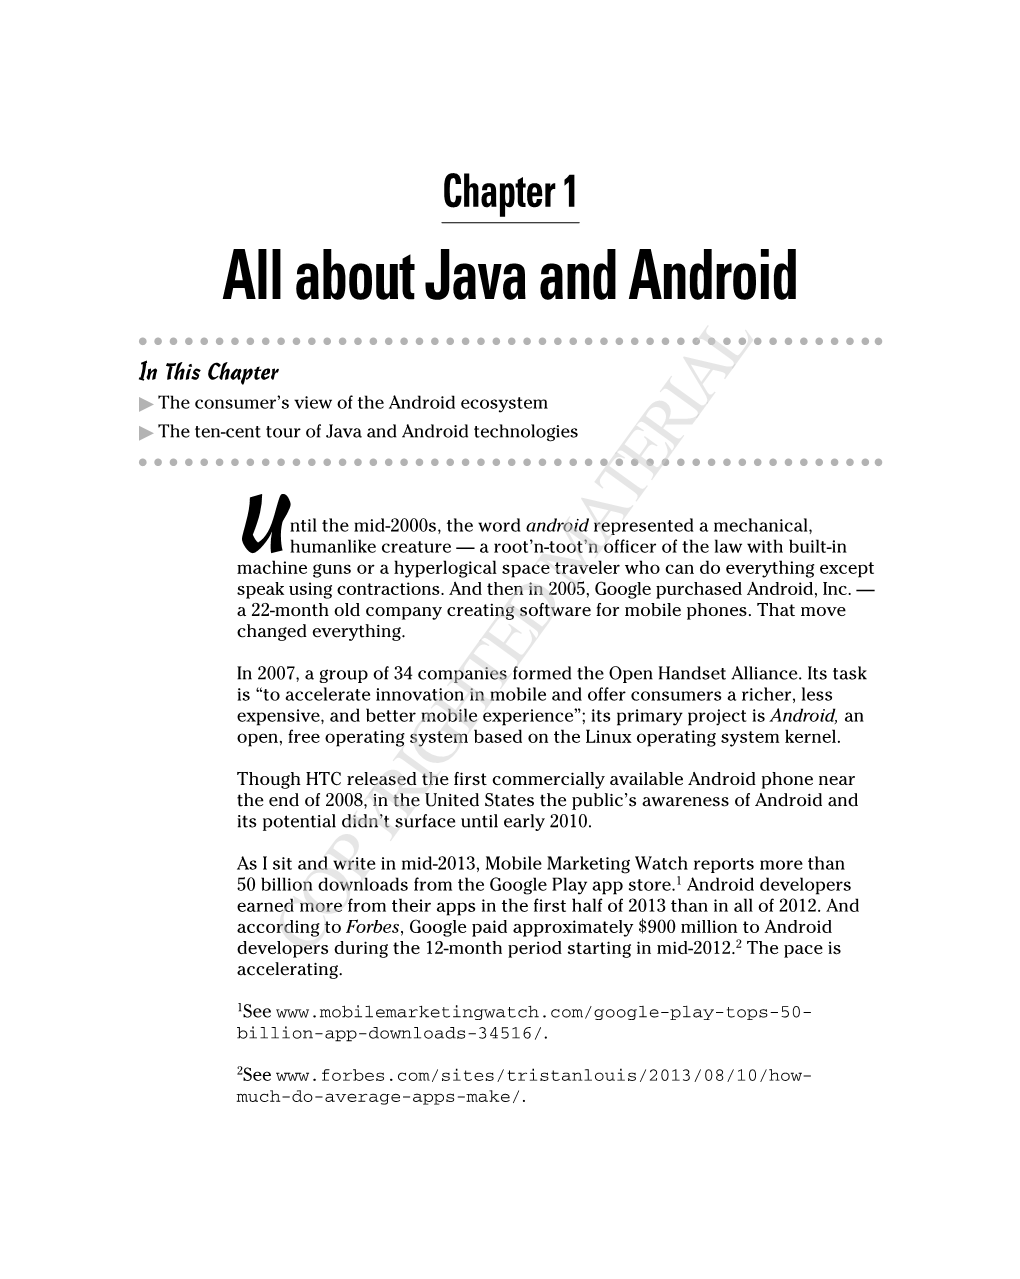 About Java and Android